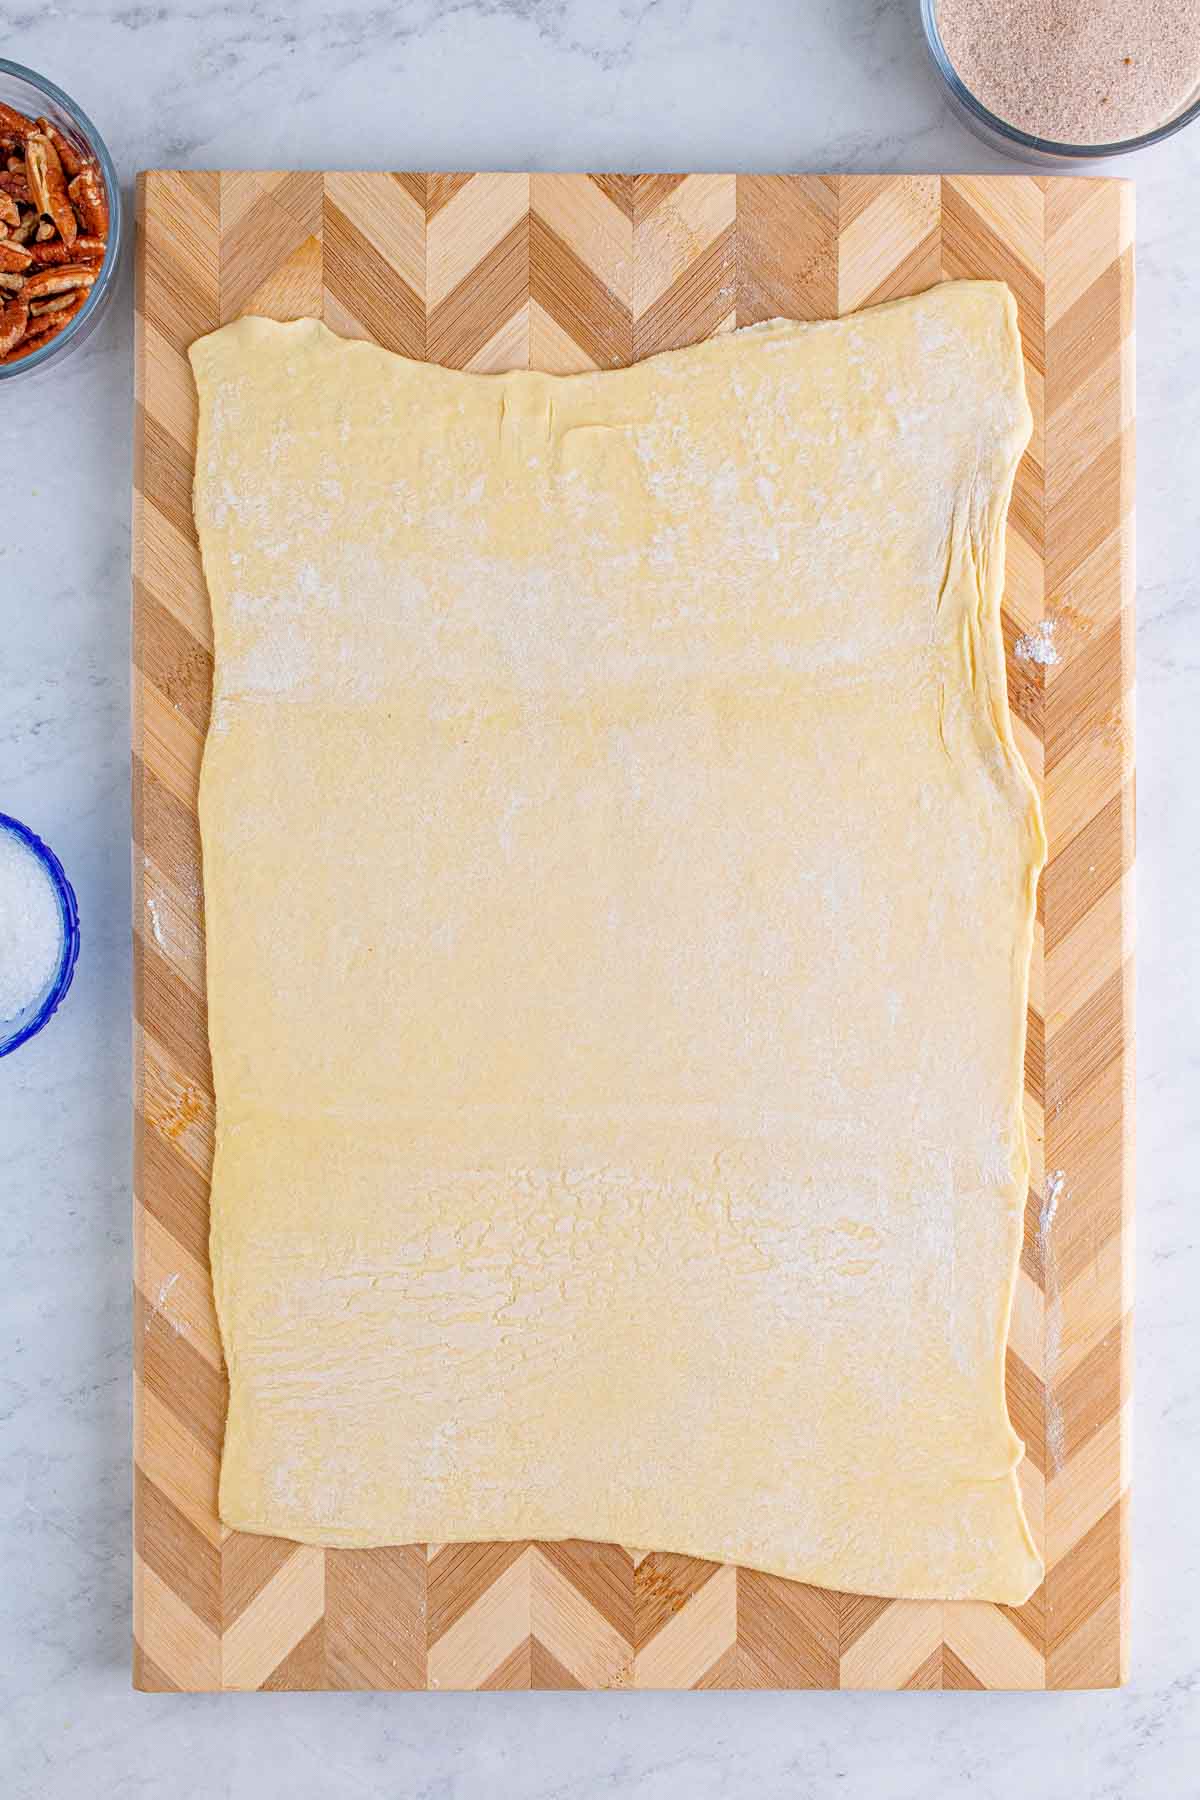 puff pastry rolled into a rectangle